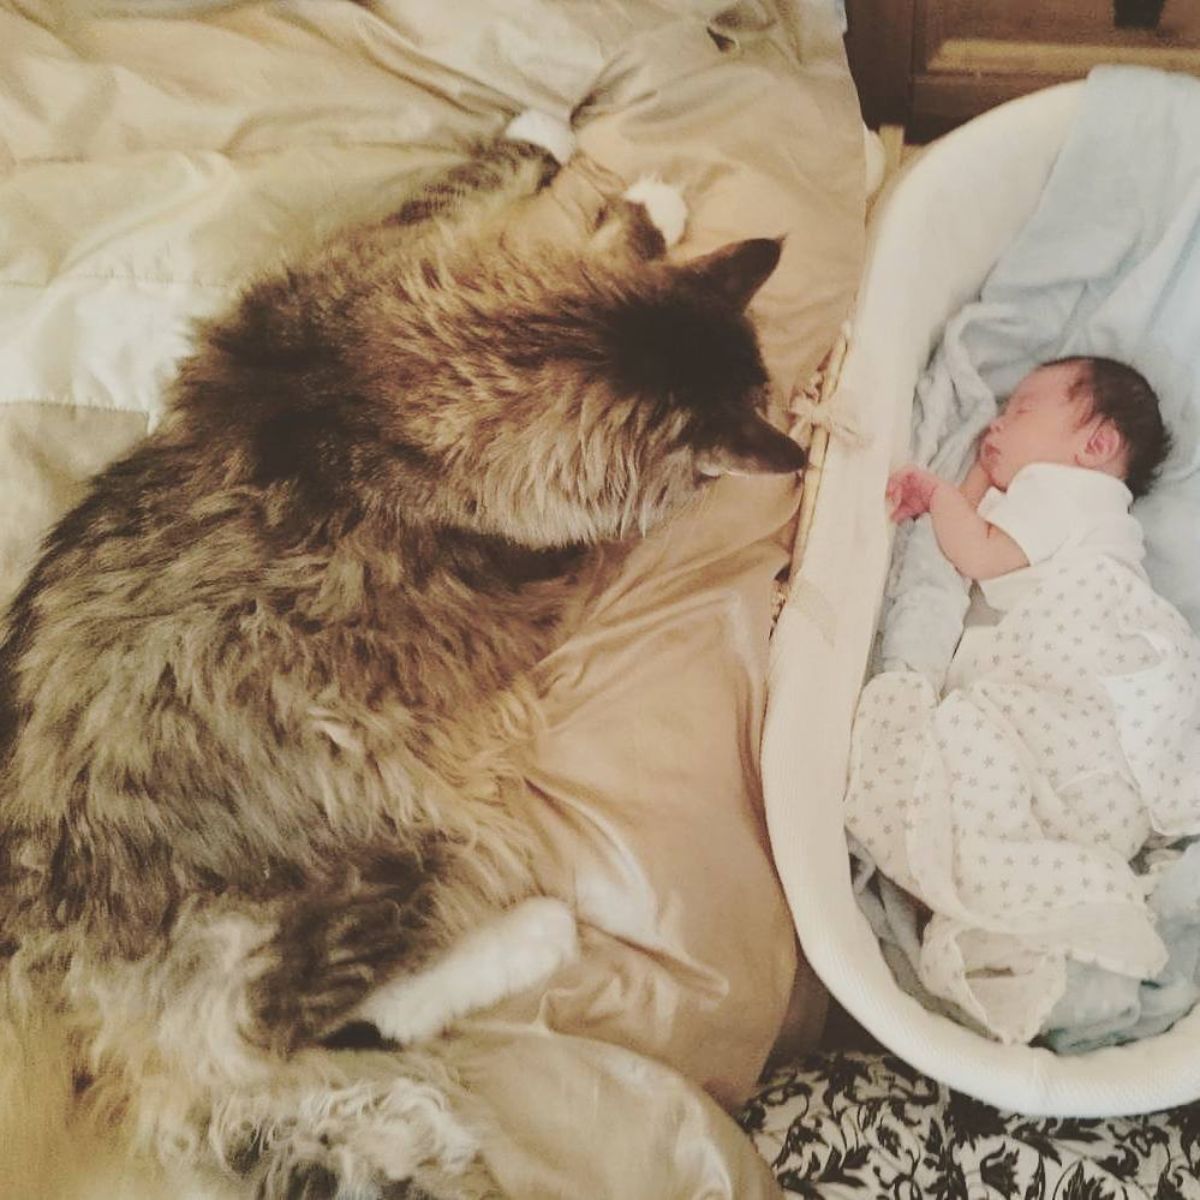 A fluffy brown maine coon looking over a sleeping baby in a baby bed.